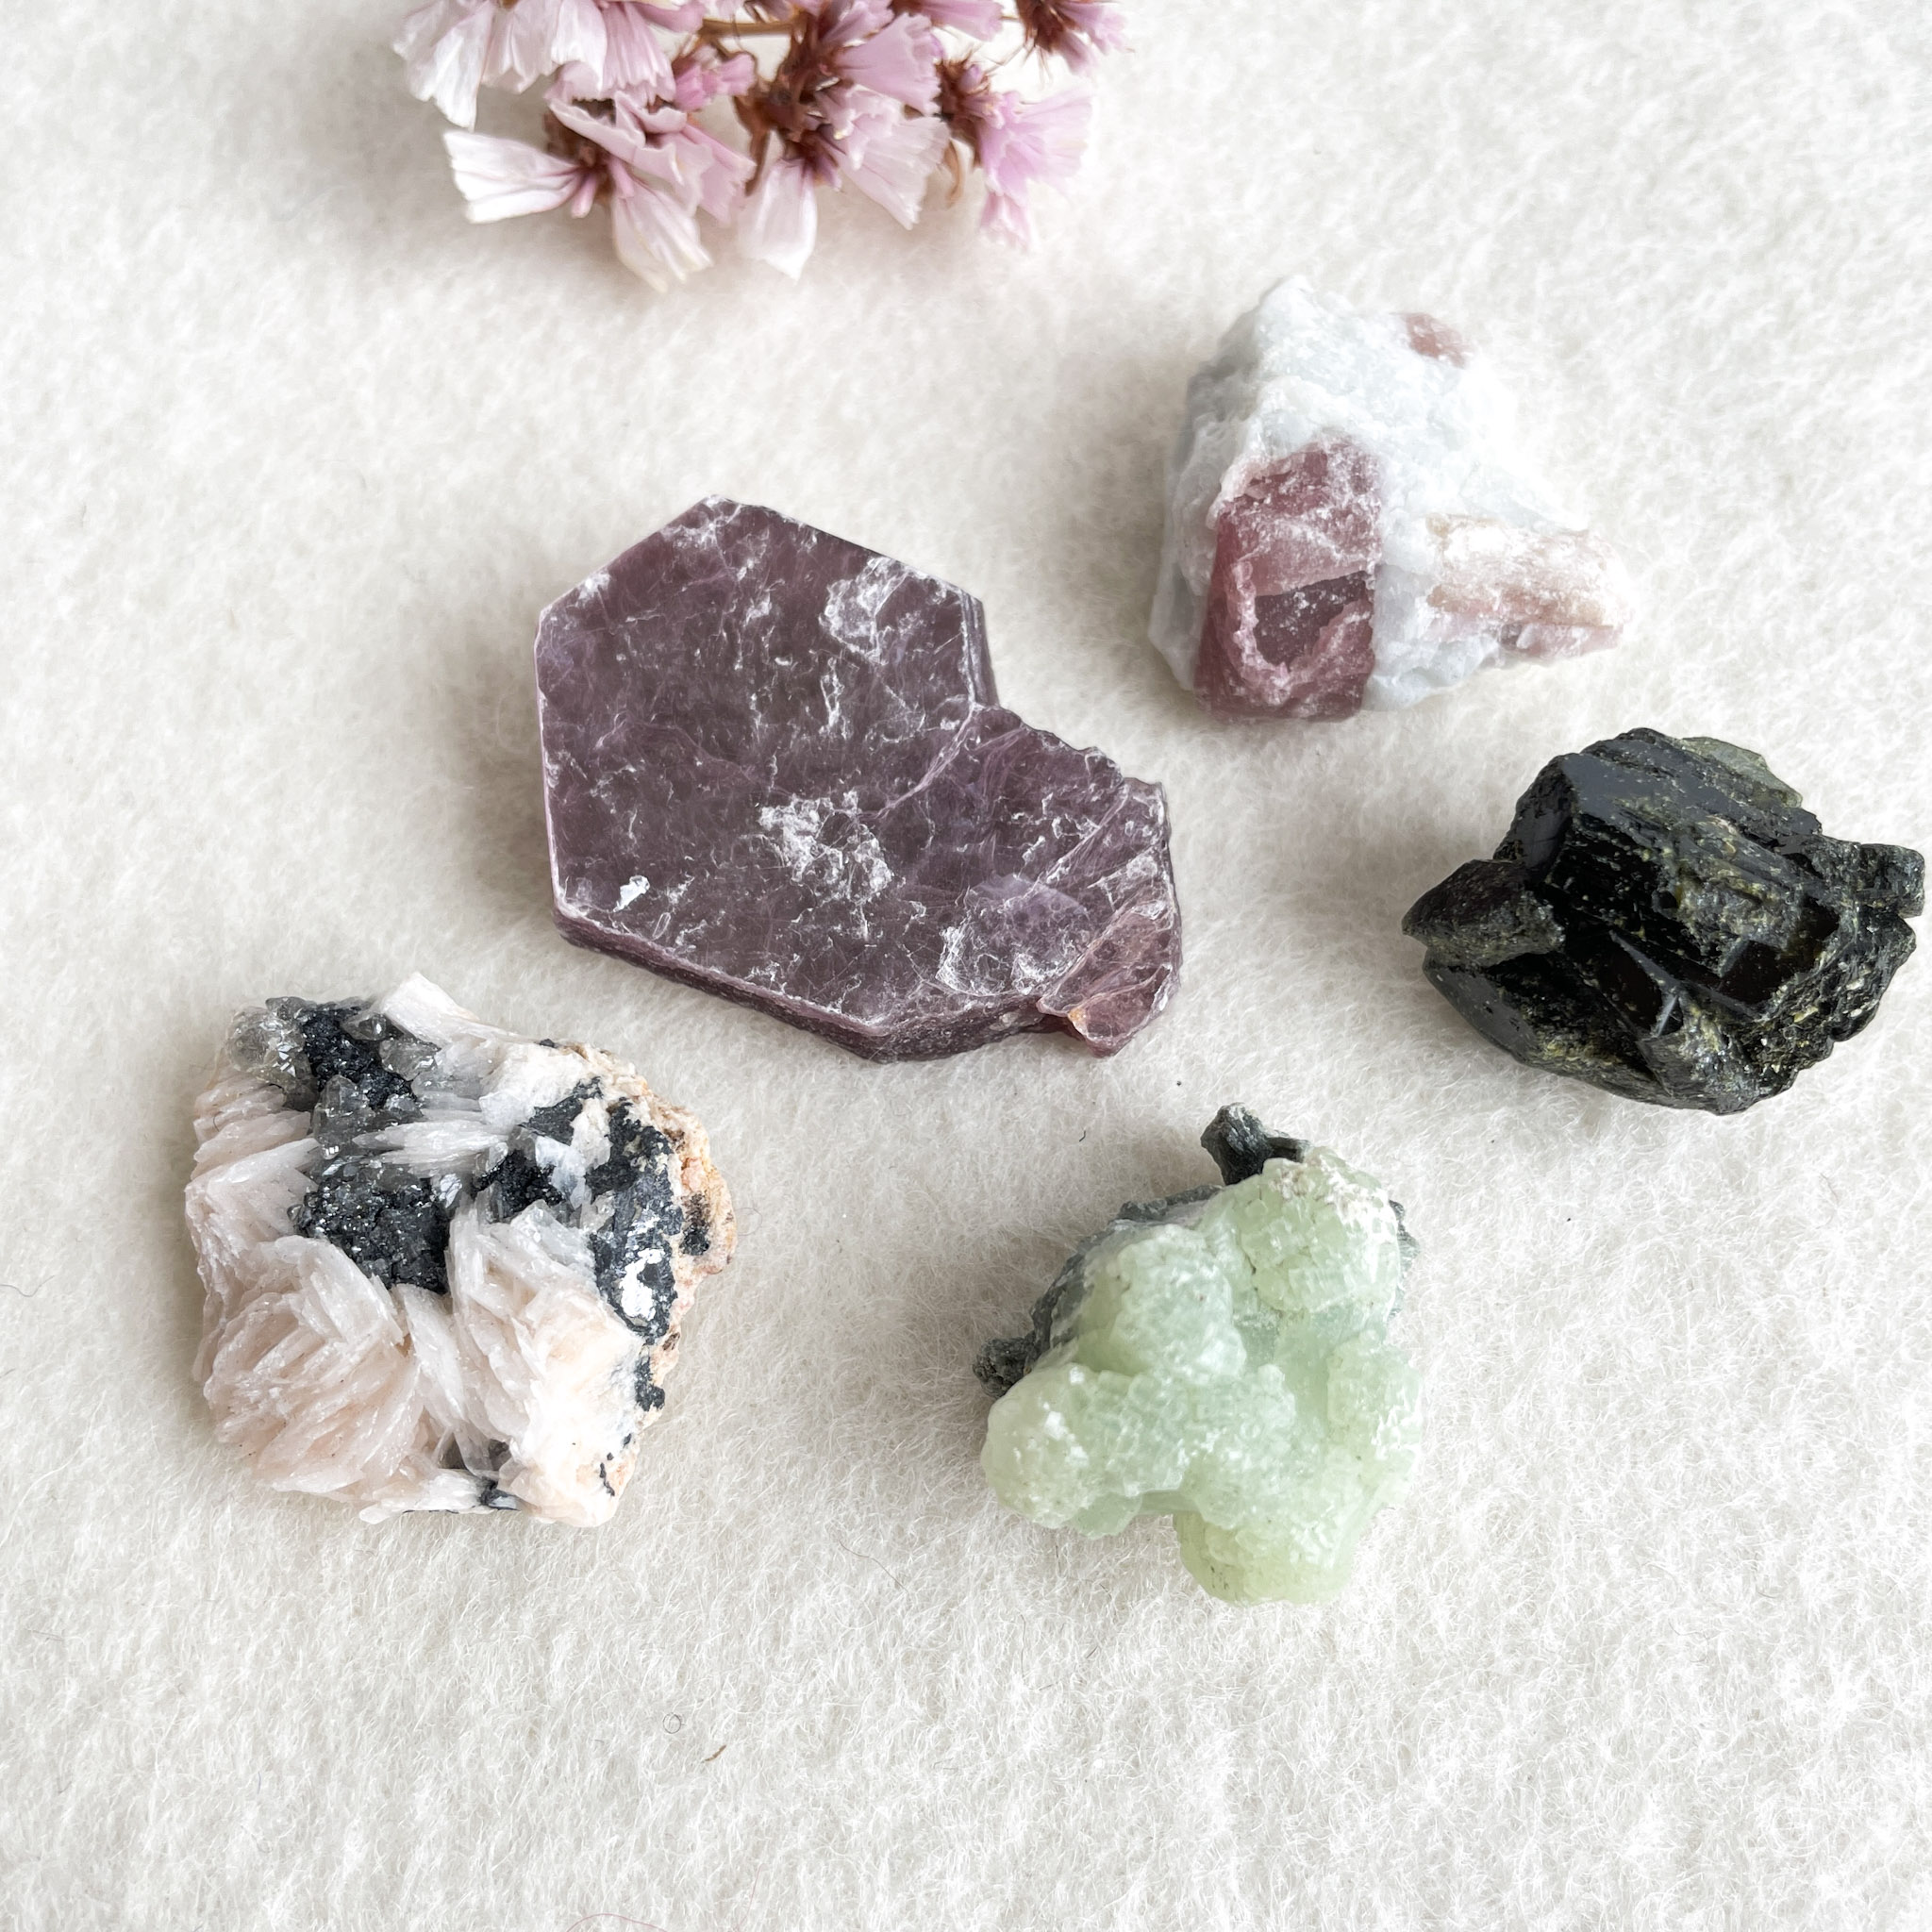 A collection of various rough mineral specimens and a small cluster of dried pink flowers on a textured paper background.